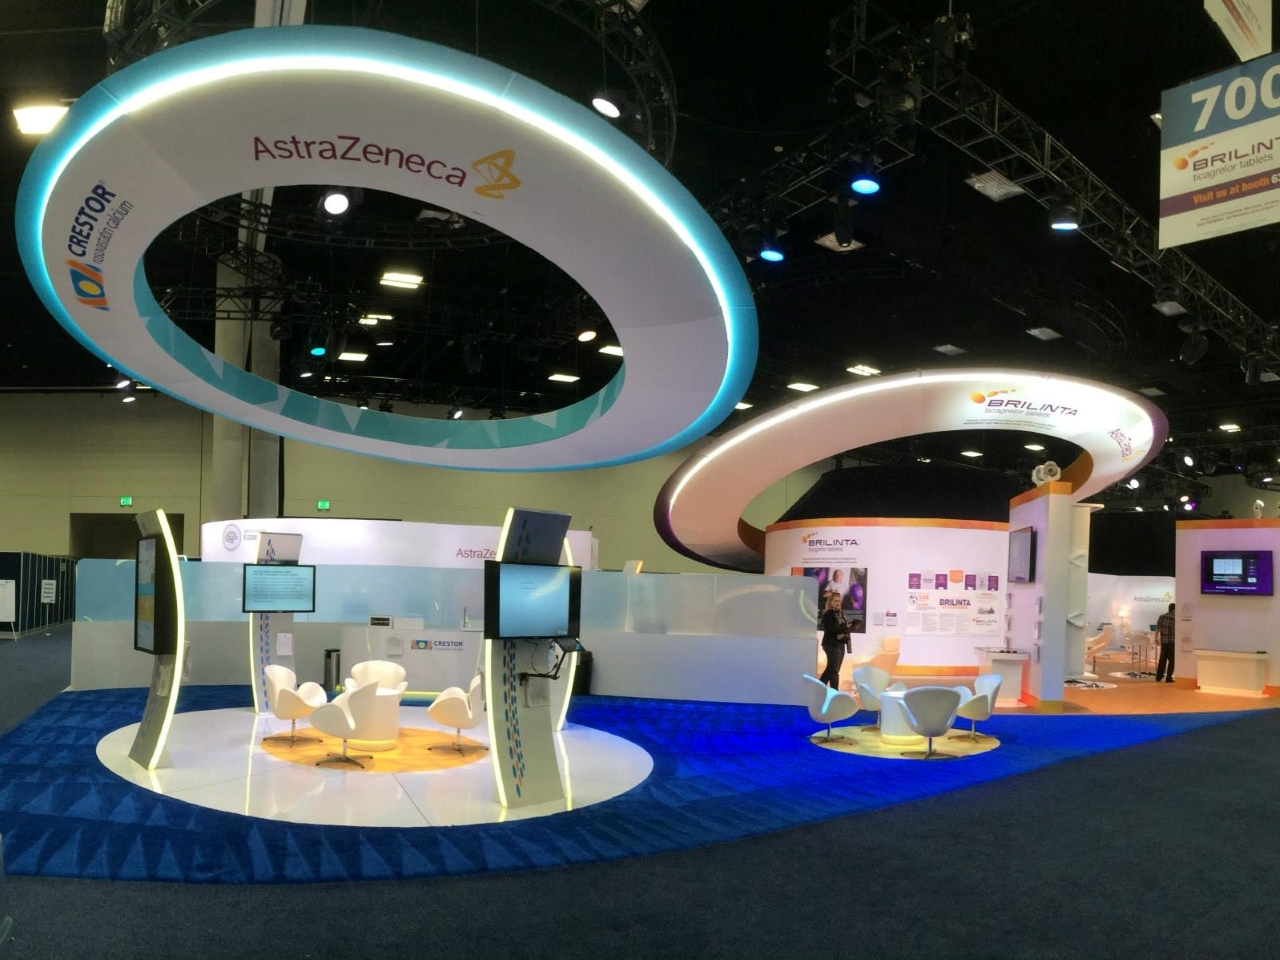 Astrazeneca Booth at ACC 2015